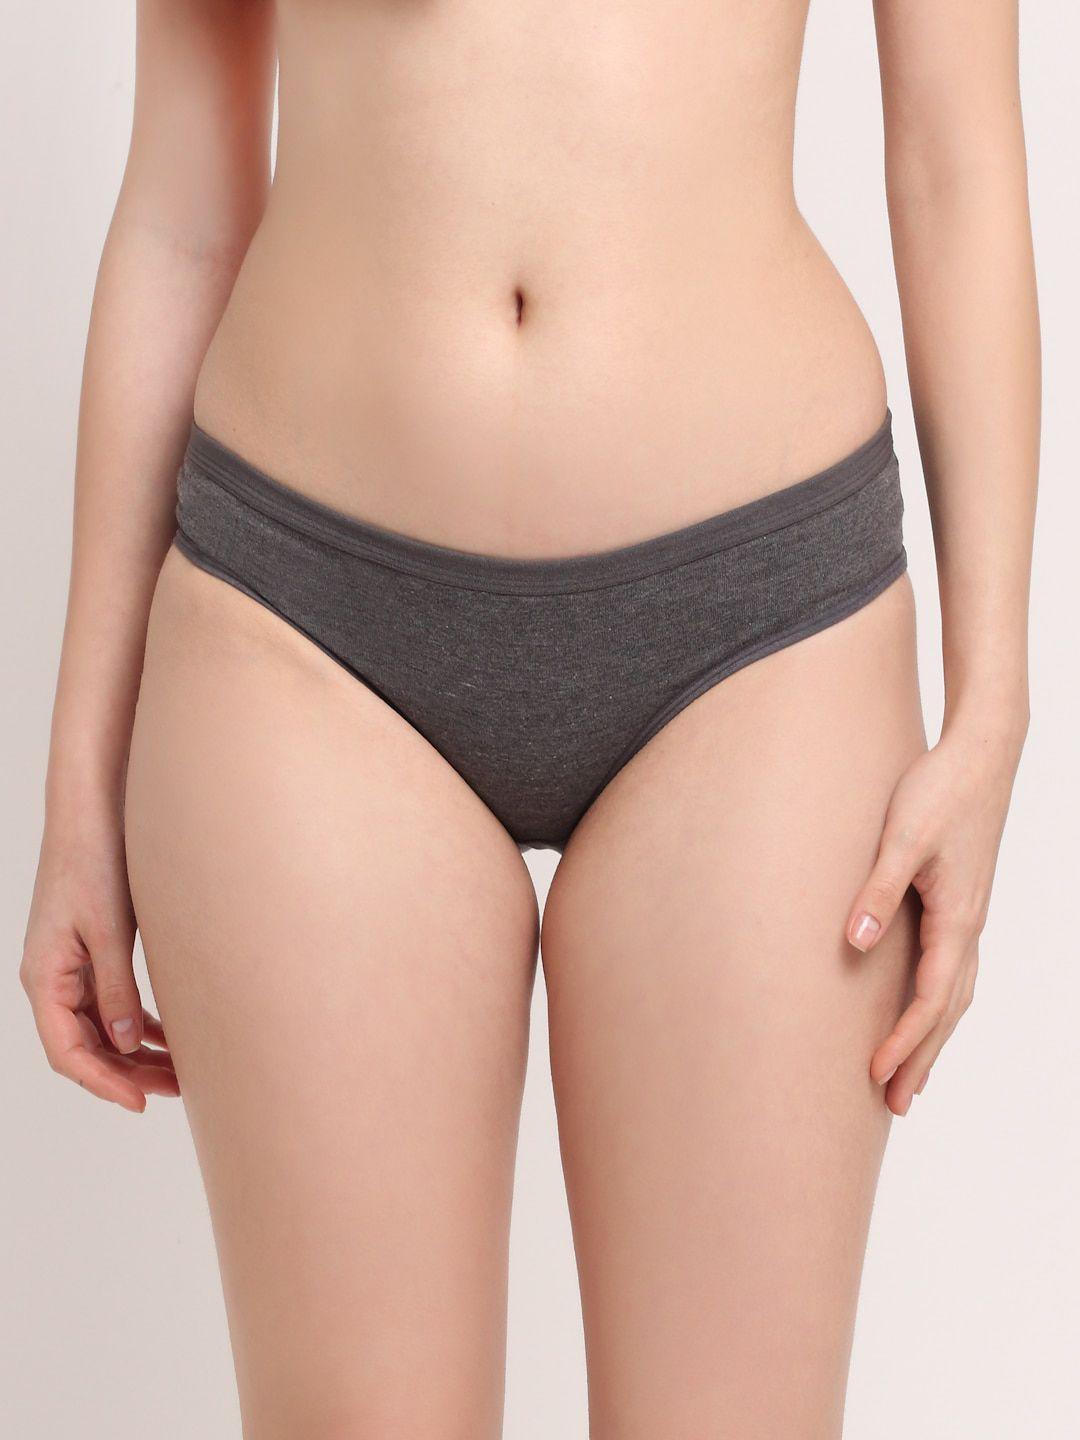 friskers-women-grey-solid-premium-cotton-hipster-briefs-o-321-22